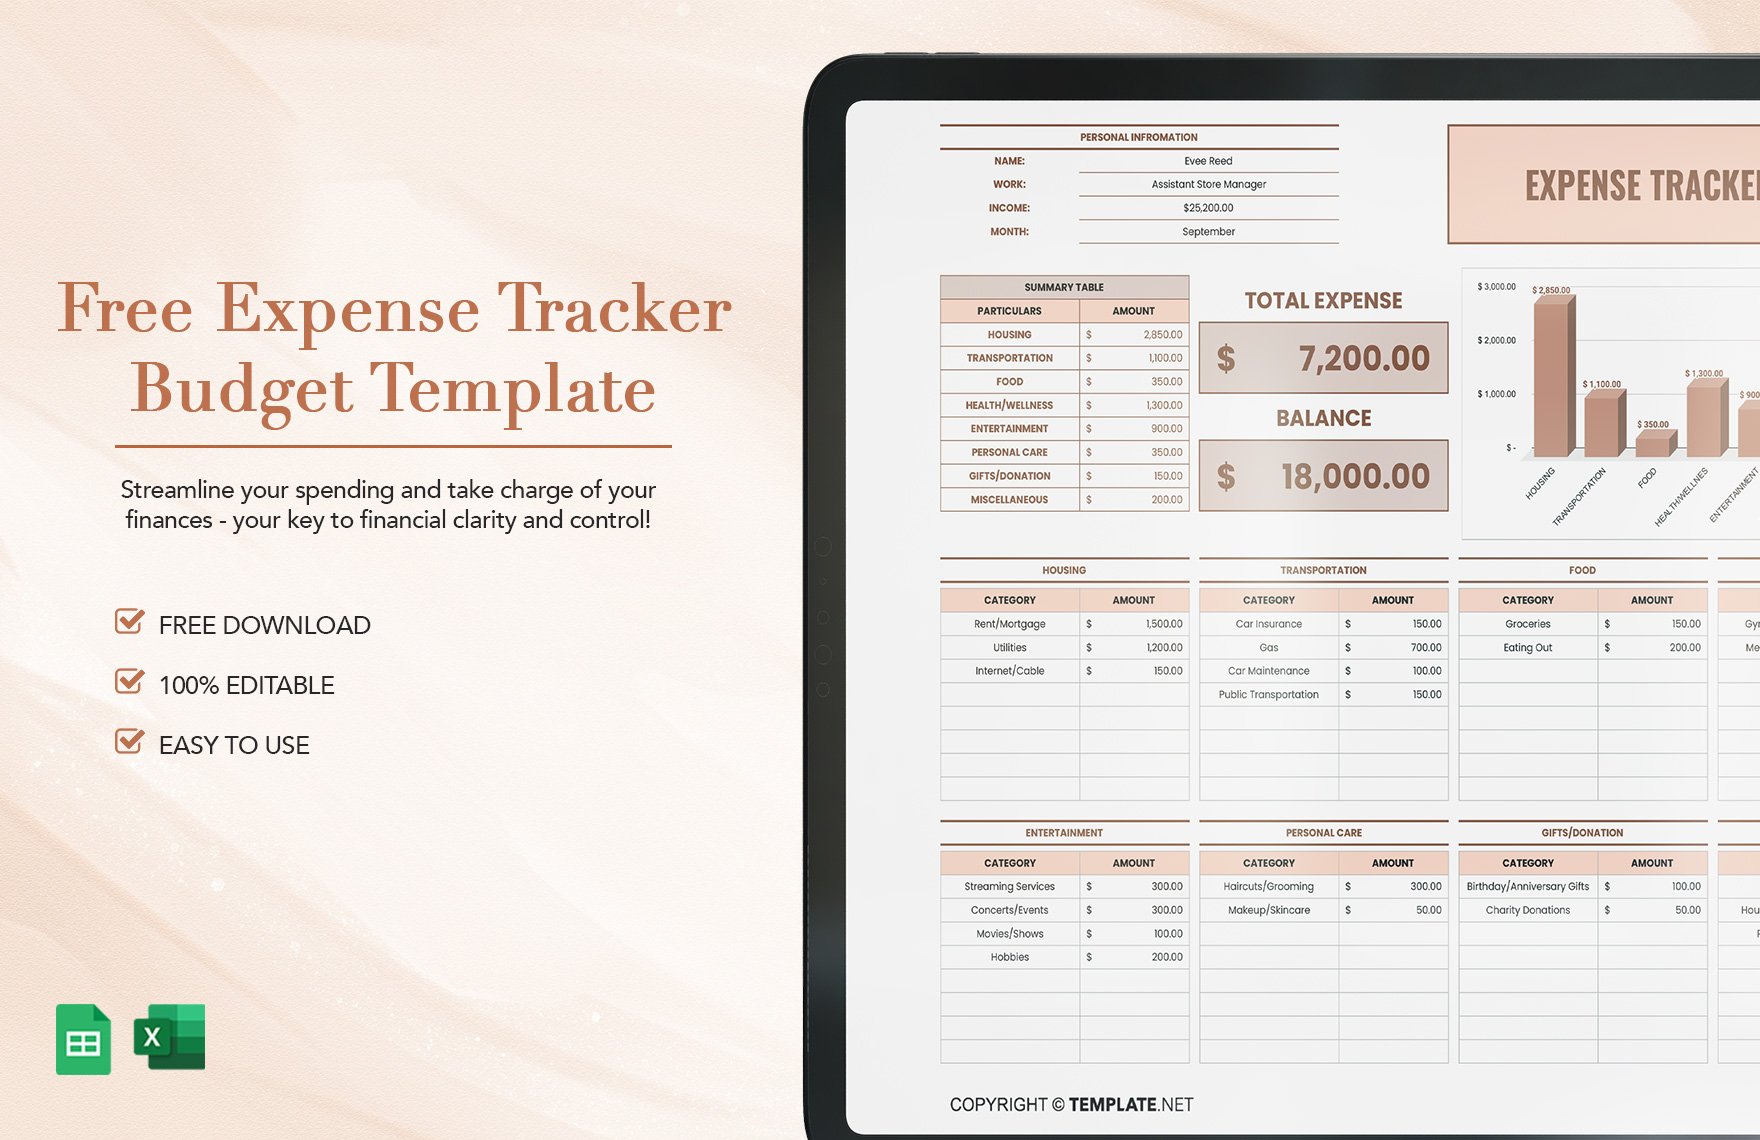 Free Expense Tracker Budget Template